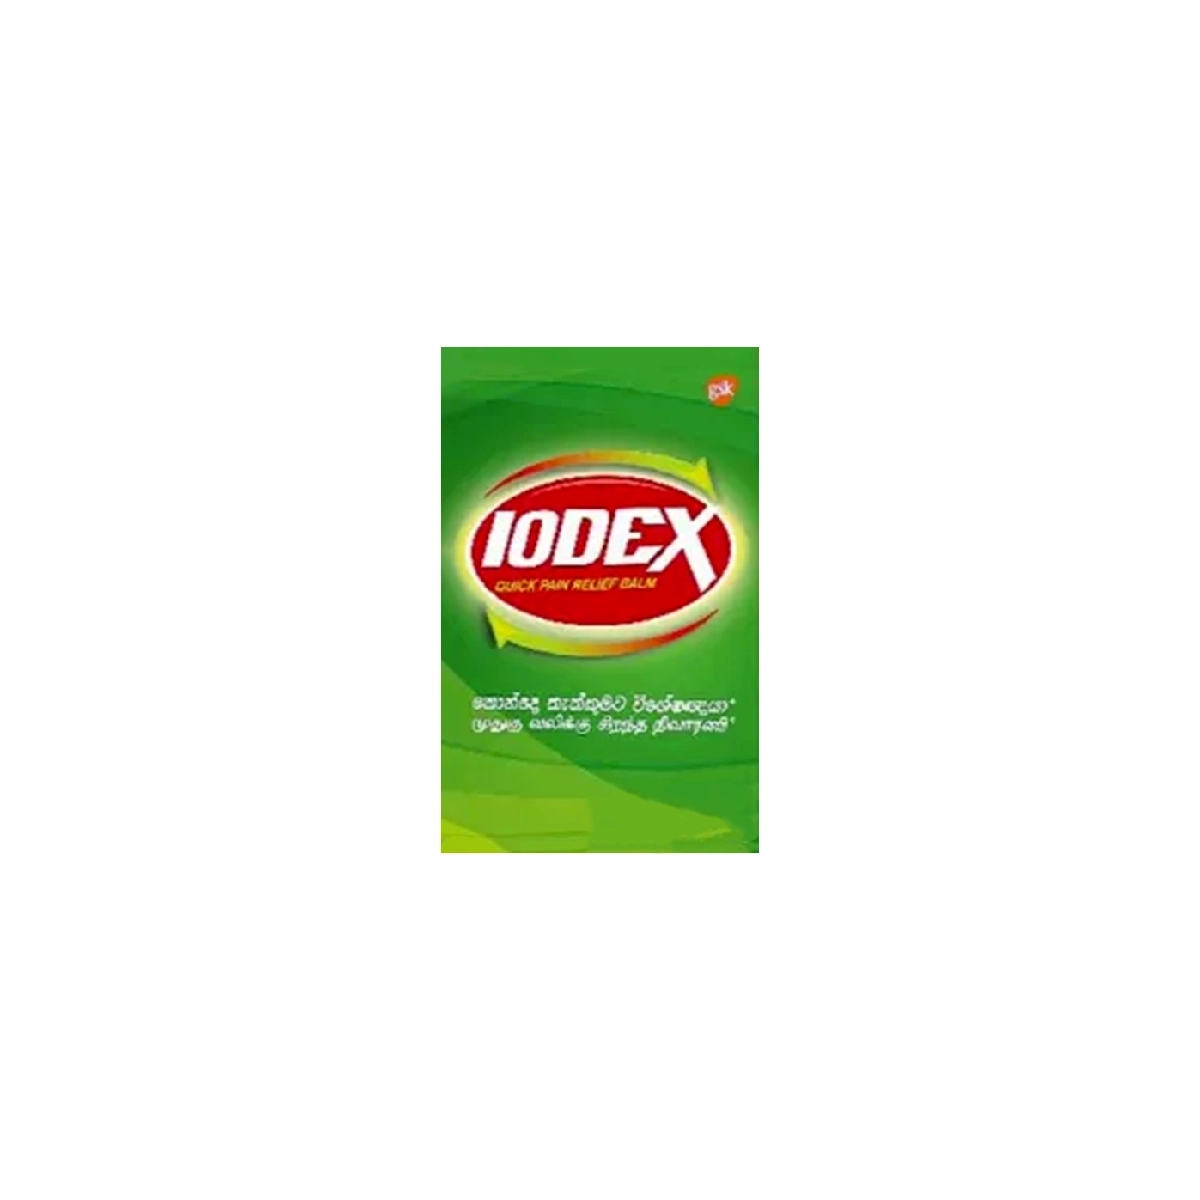 First product image of Iodex Balm 2.5g